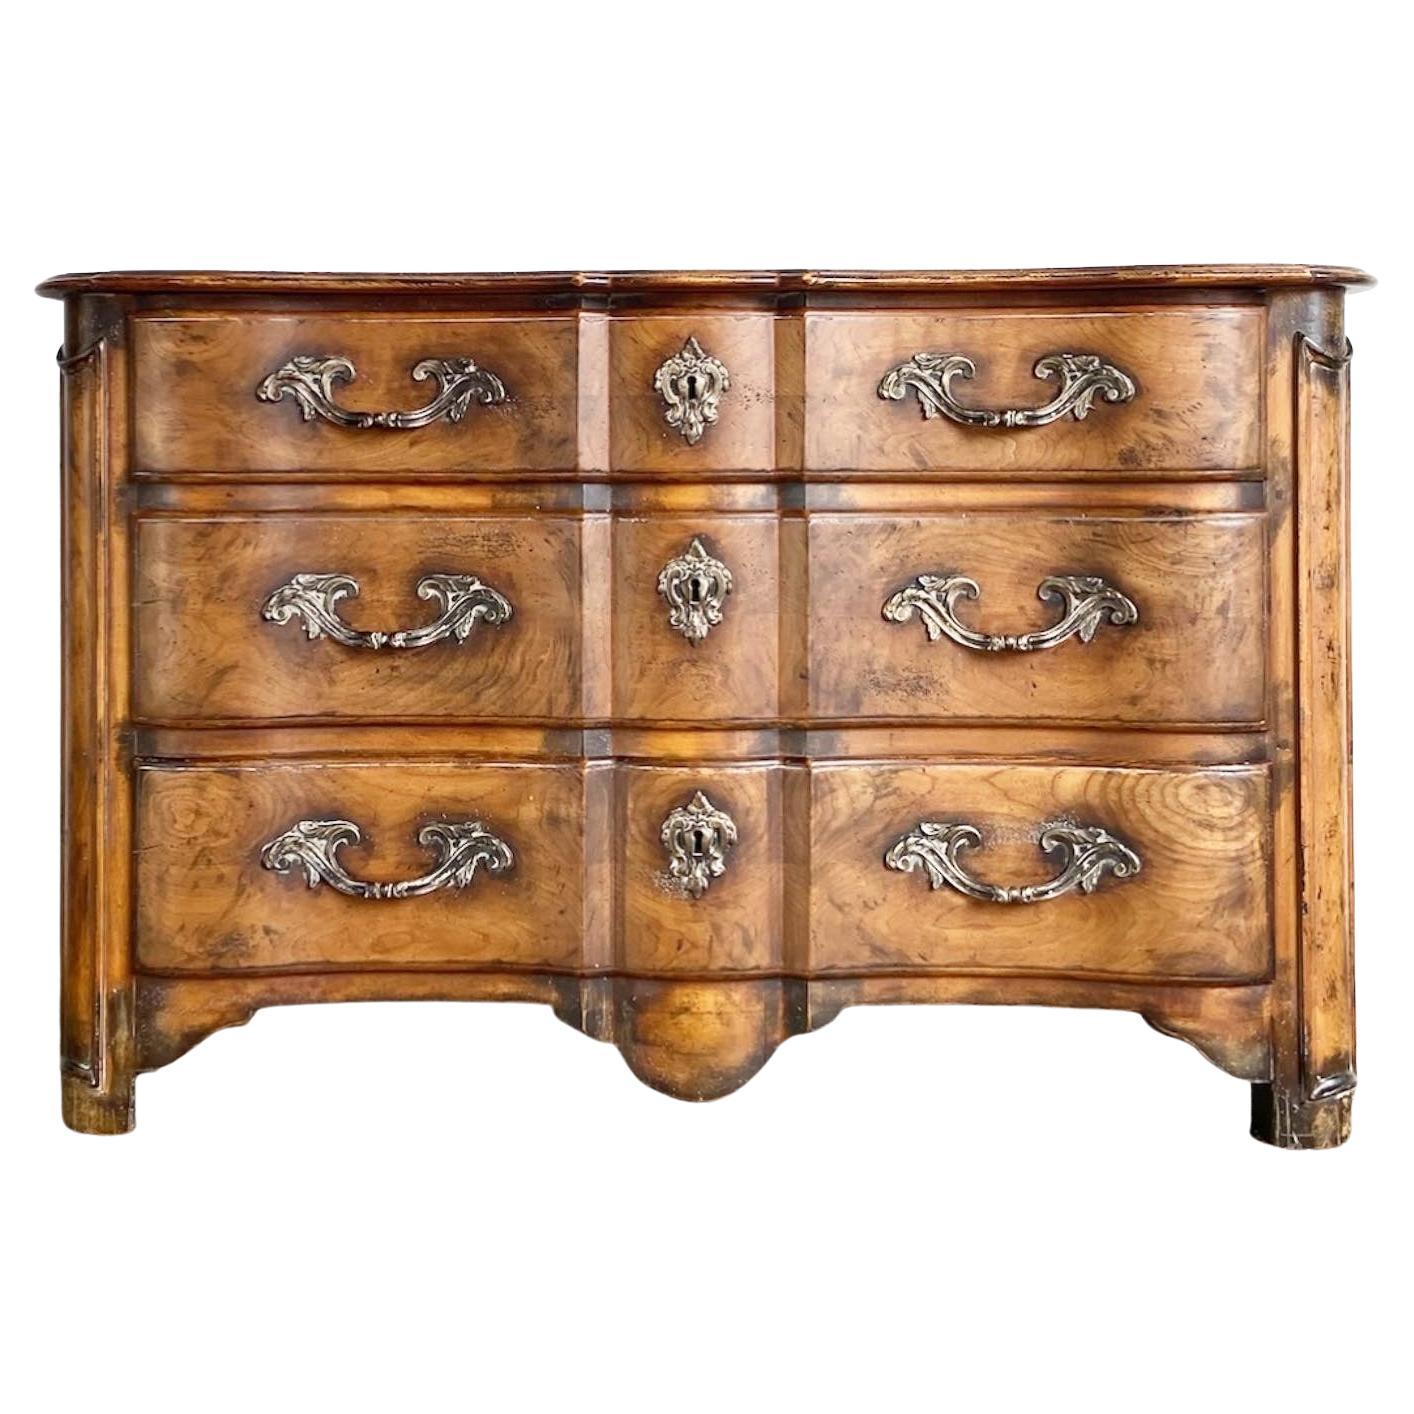 French Provincial Style Wooden Chest of Drawers by Polo Ralph Lauren For Sale